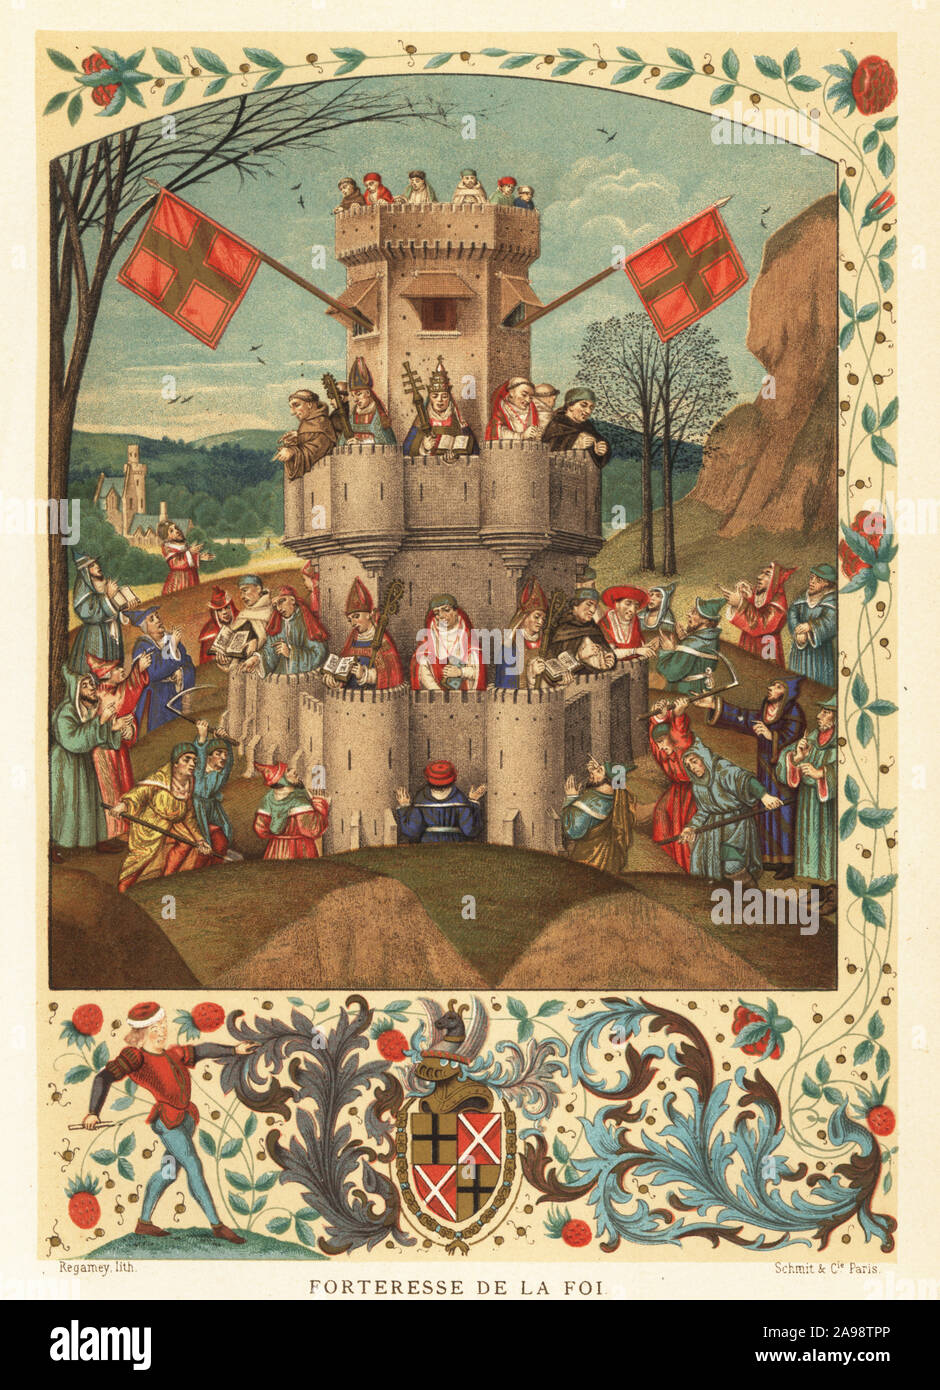 The Fortress of Faith, besieged by heretics, and defended by the knights of faith, the pope, bishops, monks and church doctors. The arms of Louis de Bruges in the border. From a 15th century miniature. Forteresse de la Foi. Chromolithograph by Felix Elie Regamey from Paul Lacroix’s La Vie Militaire et Religieuse au Moyen Age et a l’Epoque de la Renaissance, Military and Religious Life in the Middle Ages and the Renaissance, Paris, 1873. Stock Photo